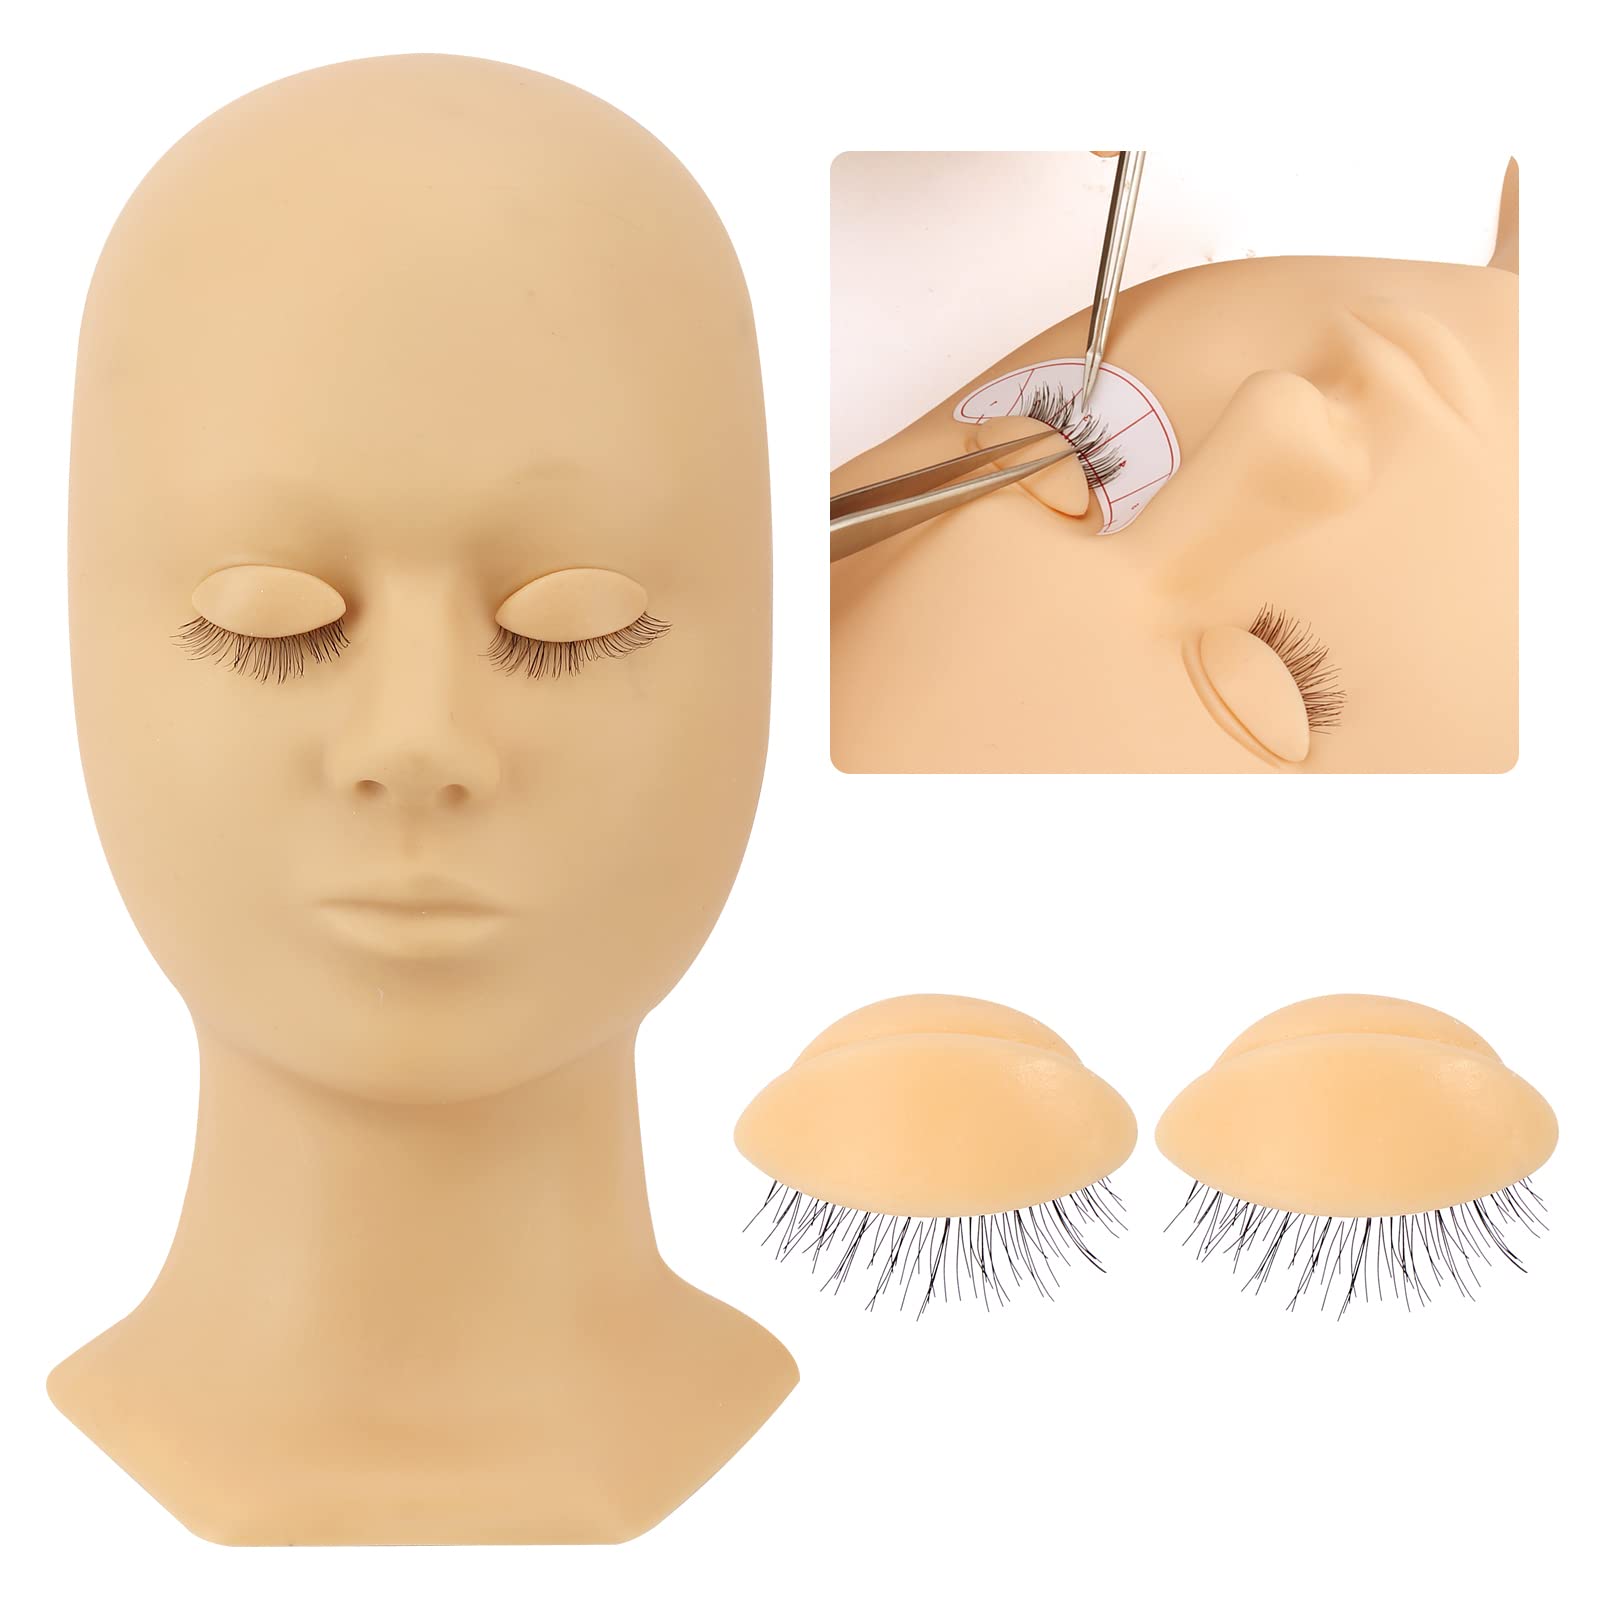 6 Pairs Replacement Eyelids for Eyelash Practice Mannequin Head, Removable Realistic Eyelid with Eyelashes Extension Training Lash Mannequin Head Eyelids for Eyelash Practice (Light Color)